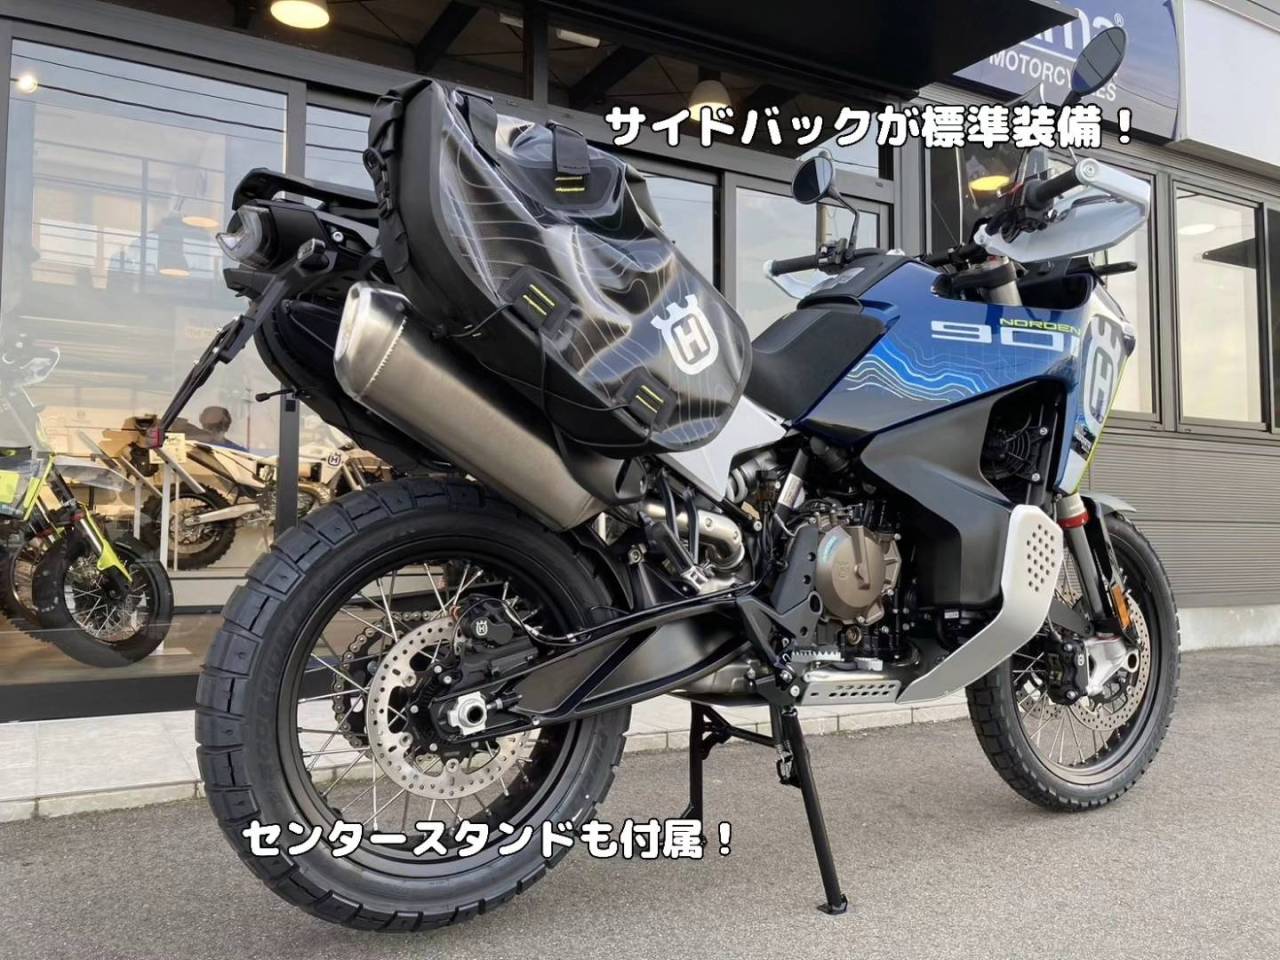 Norden901Expedition 入荷！ハスクバーナモーターサイクルズ 山形